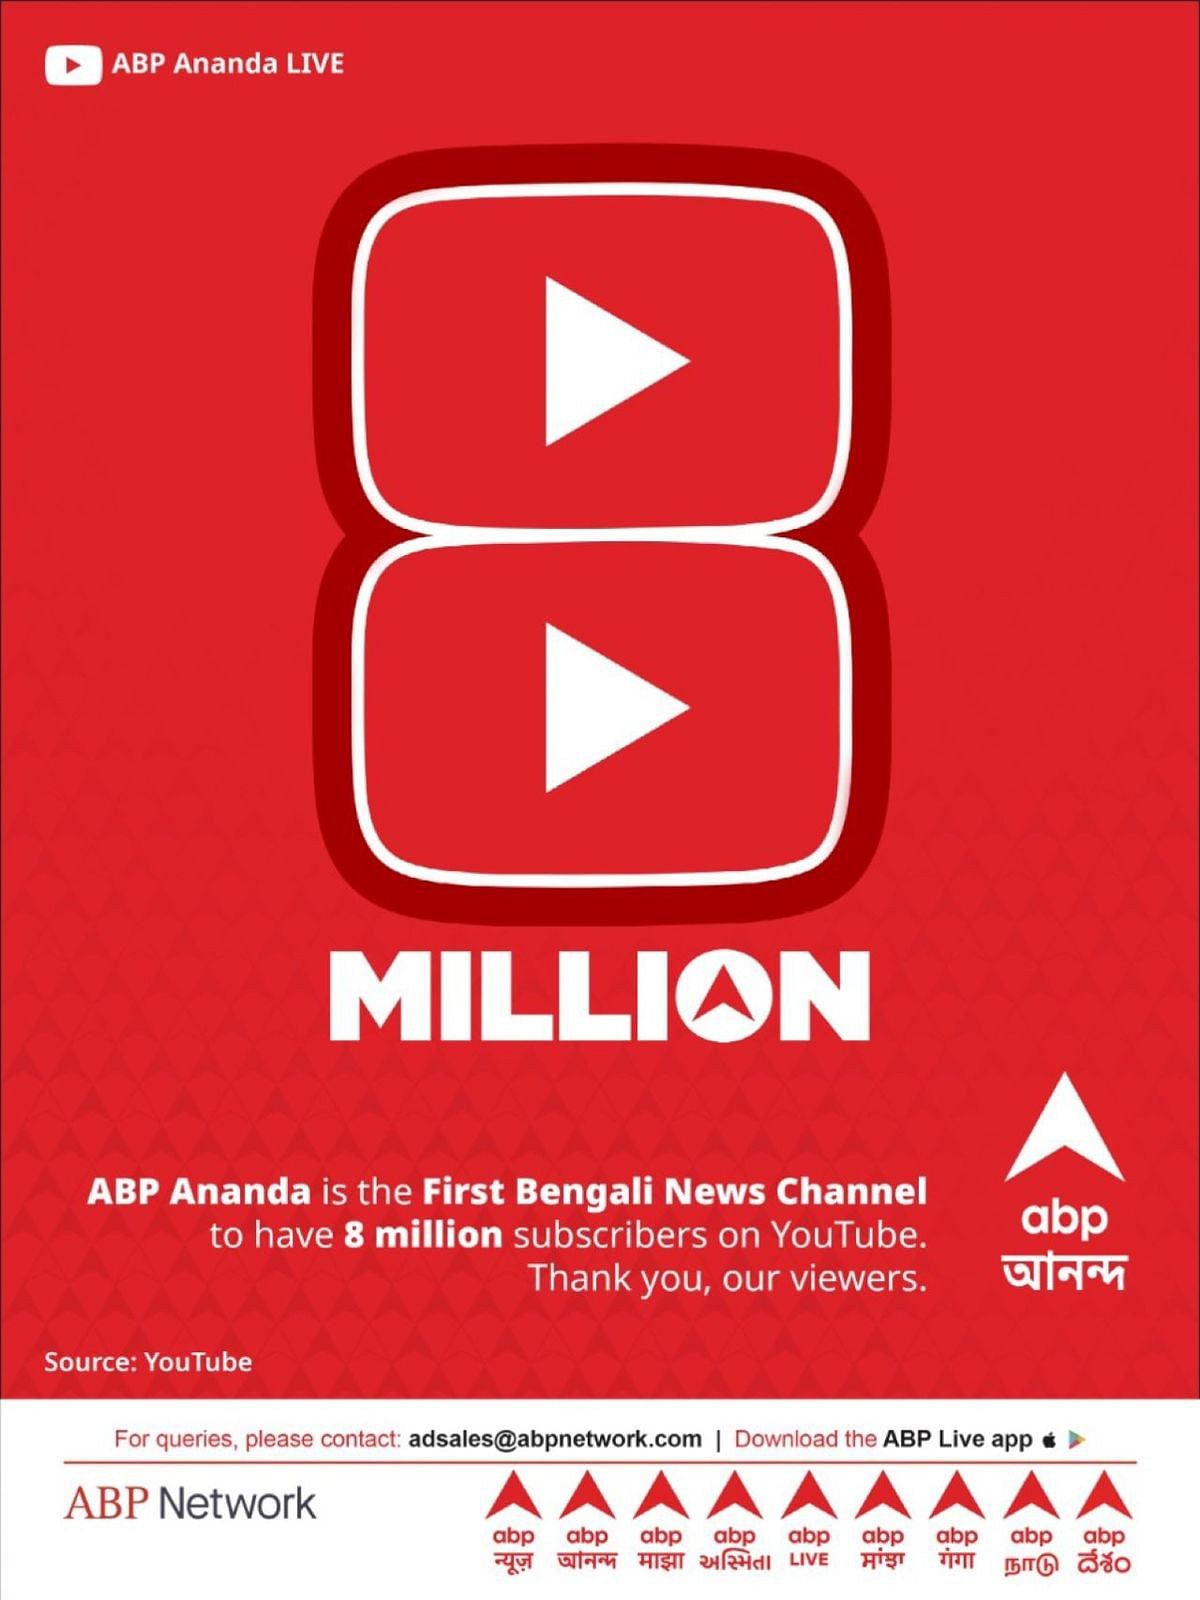 New branding of abp ananda,logo change and total journey of star ananda to abp  ananda,why changing ? - YouTube